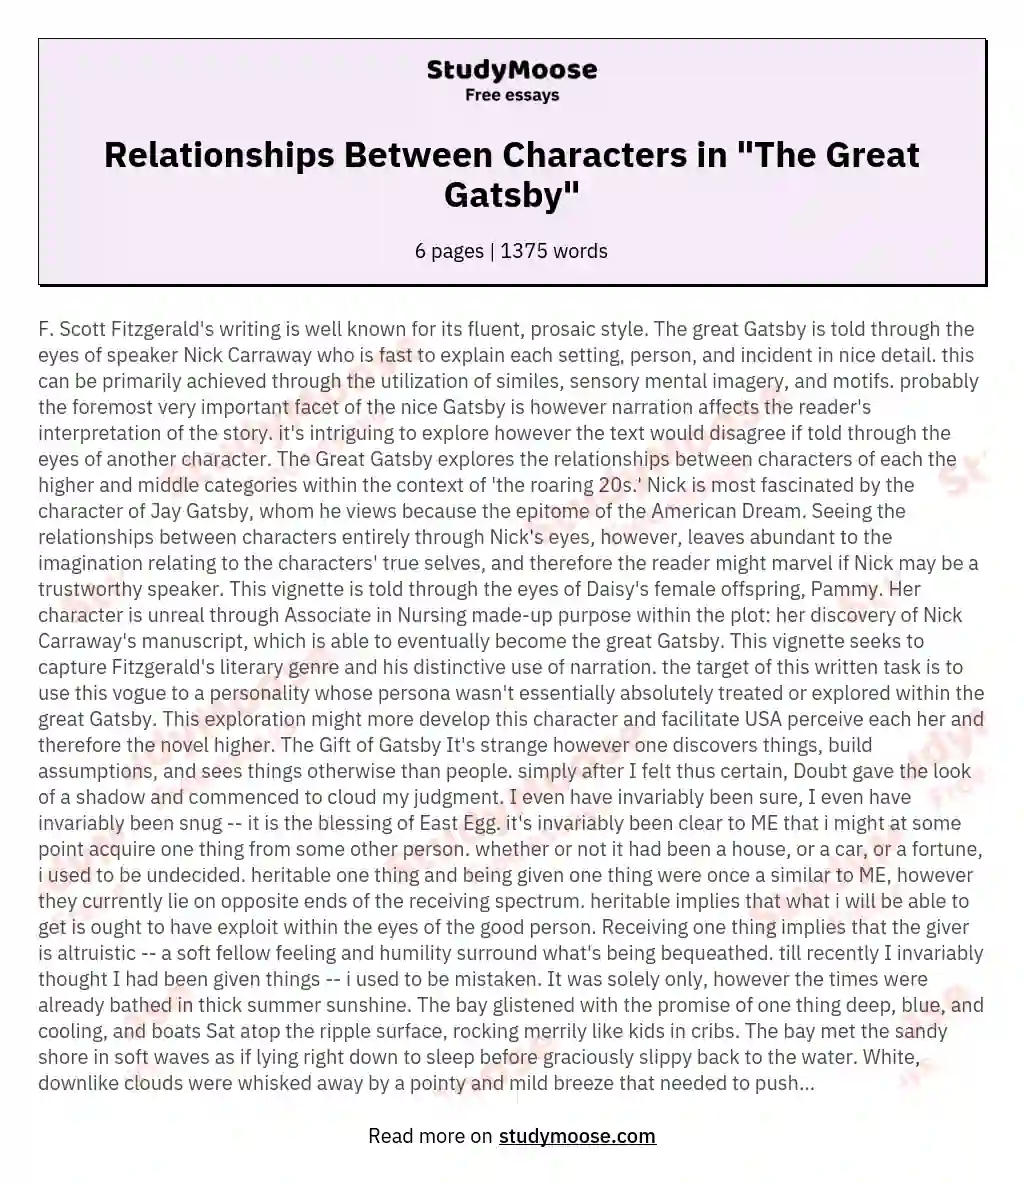 Relationships Between Characters in "The Great Gatsby"